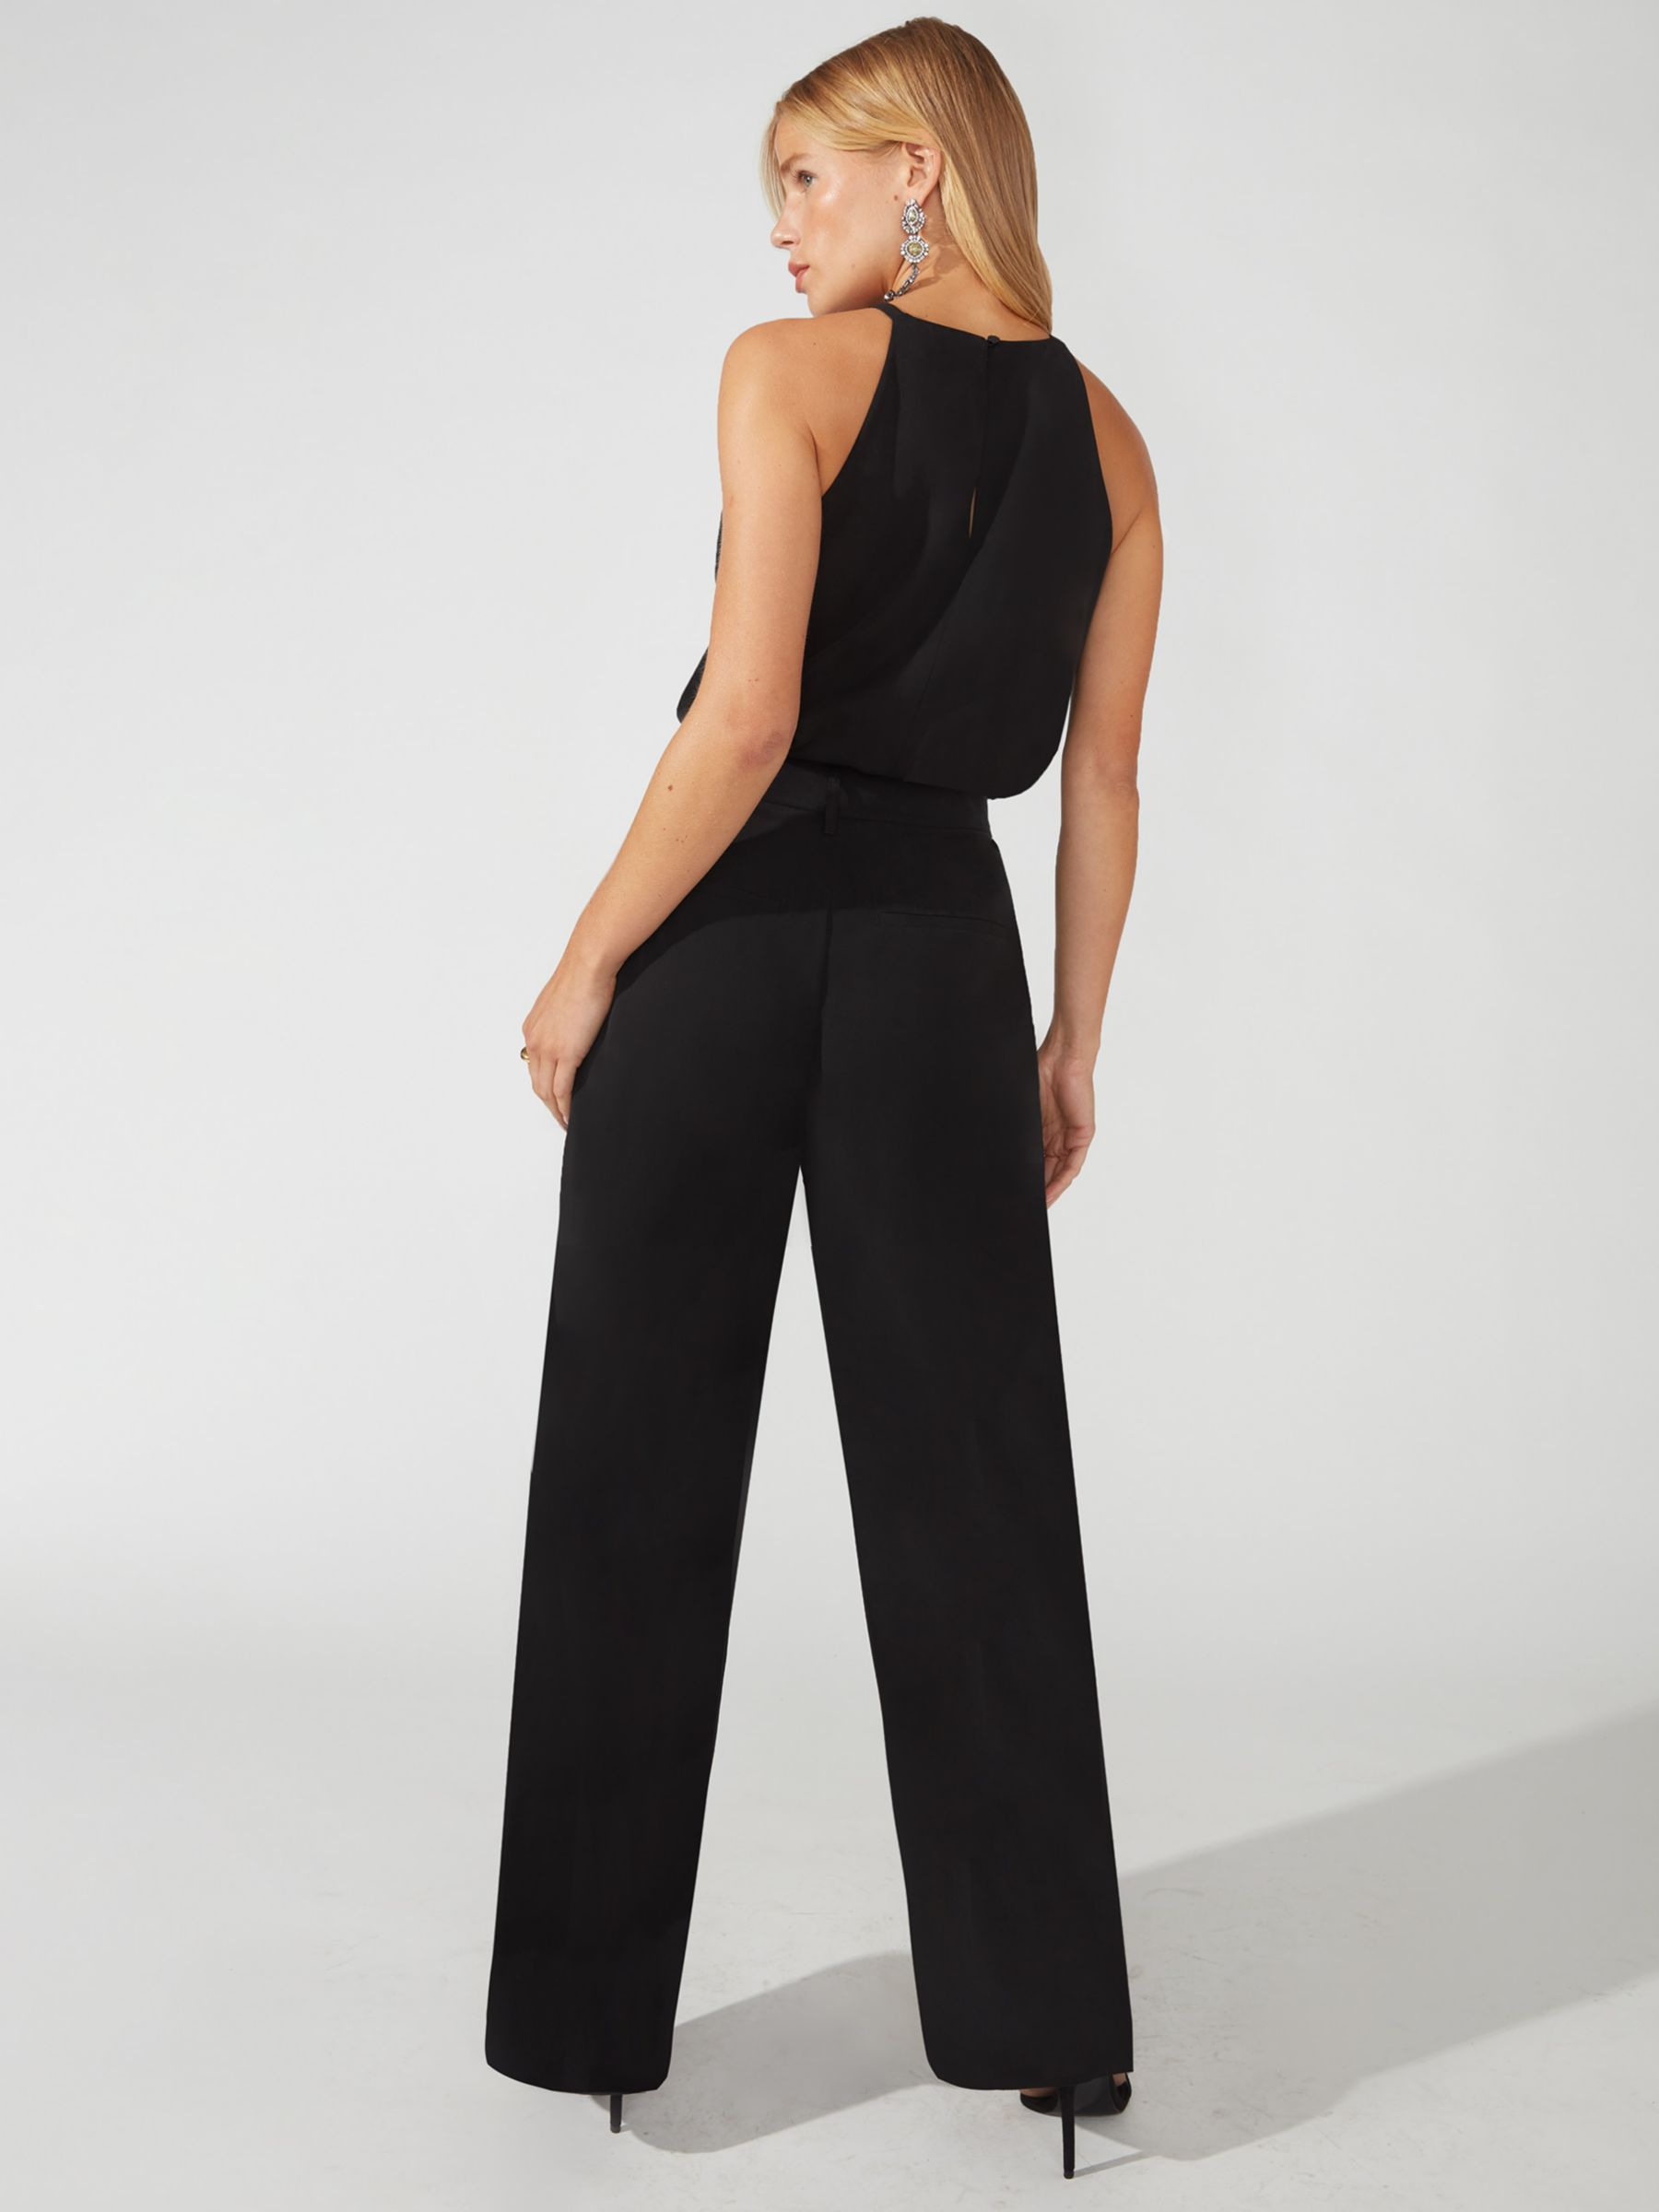 Buy Ro&Zo Lyocell Trousers, Black Online at johnlewis.com